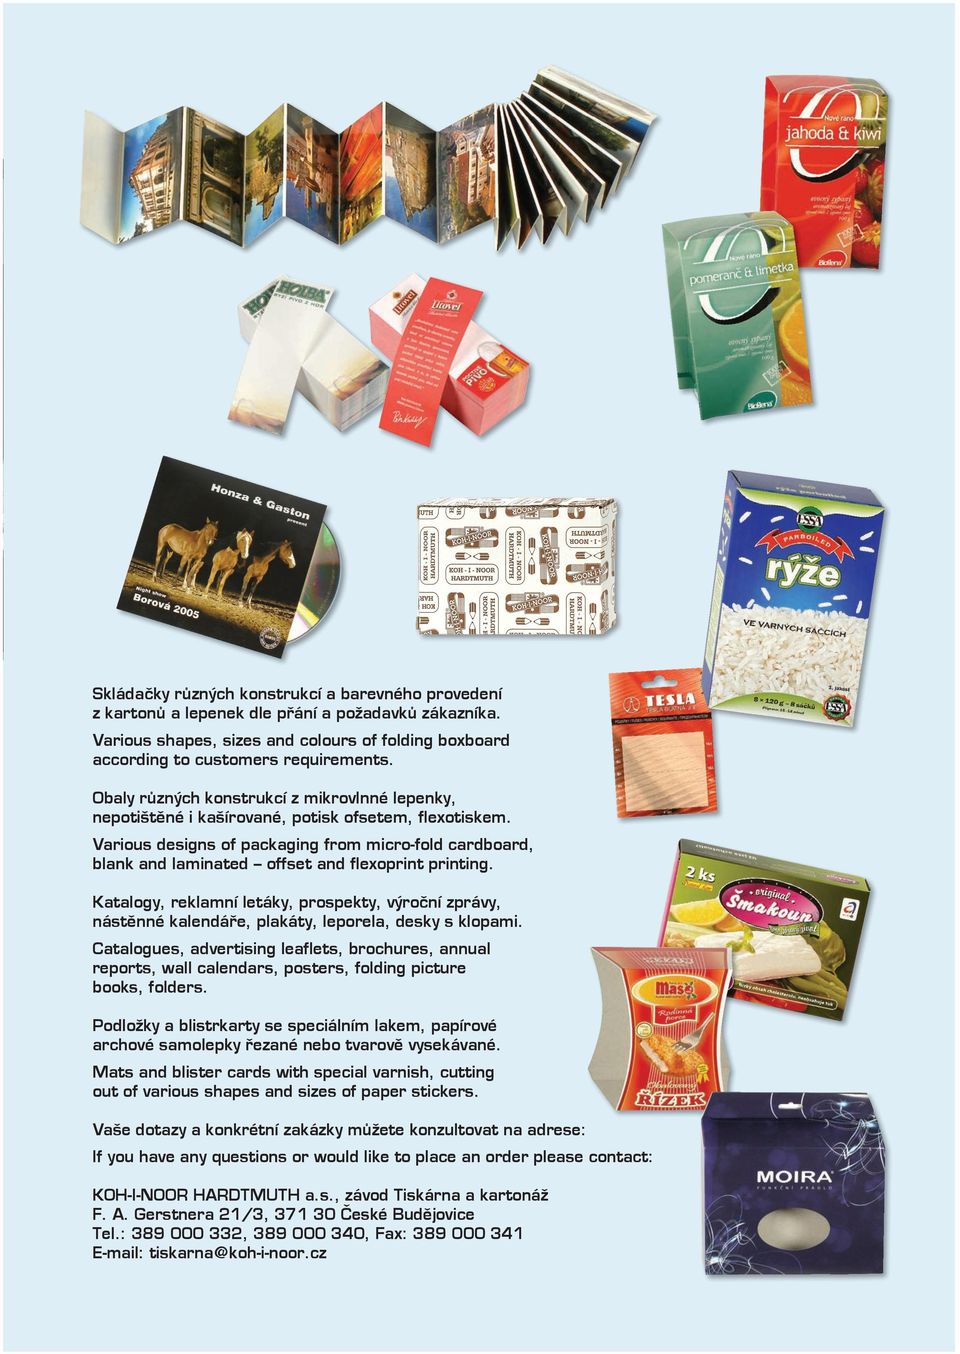 Various designs of packaging from micro-fold cardboard, blank and laminated offset and flexoprint printing.